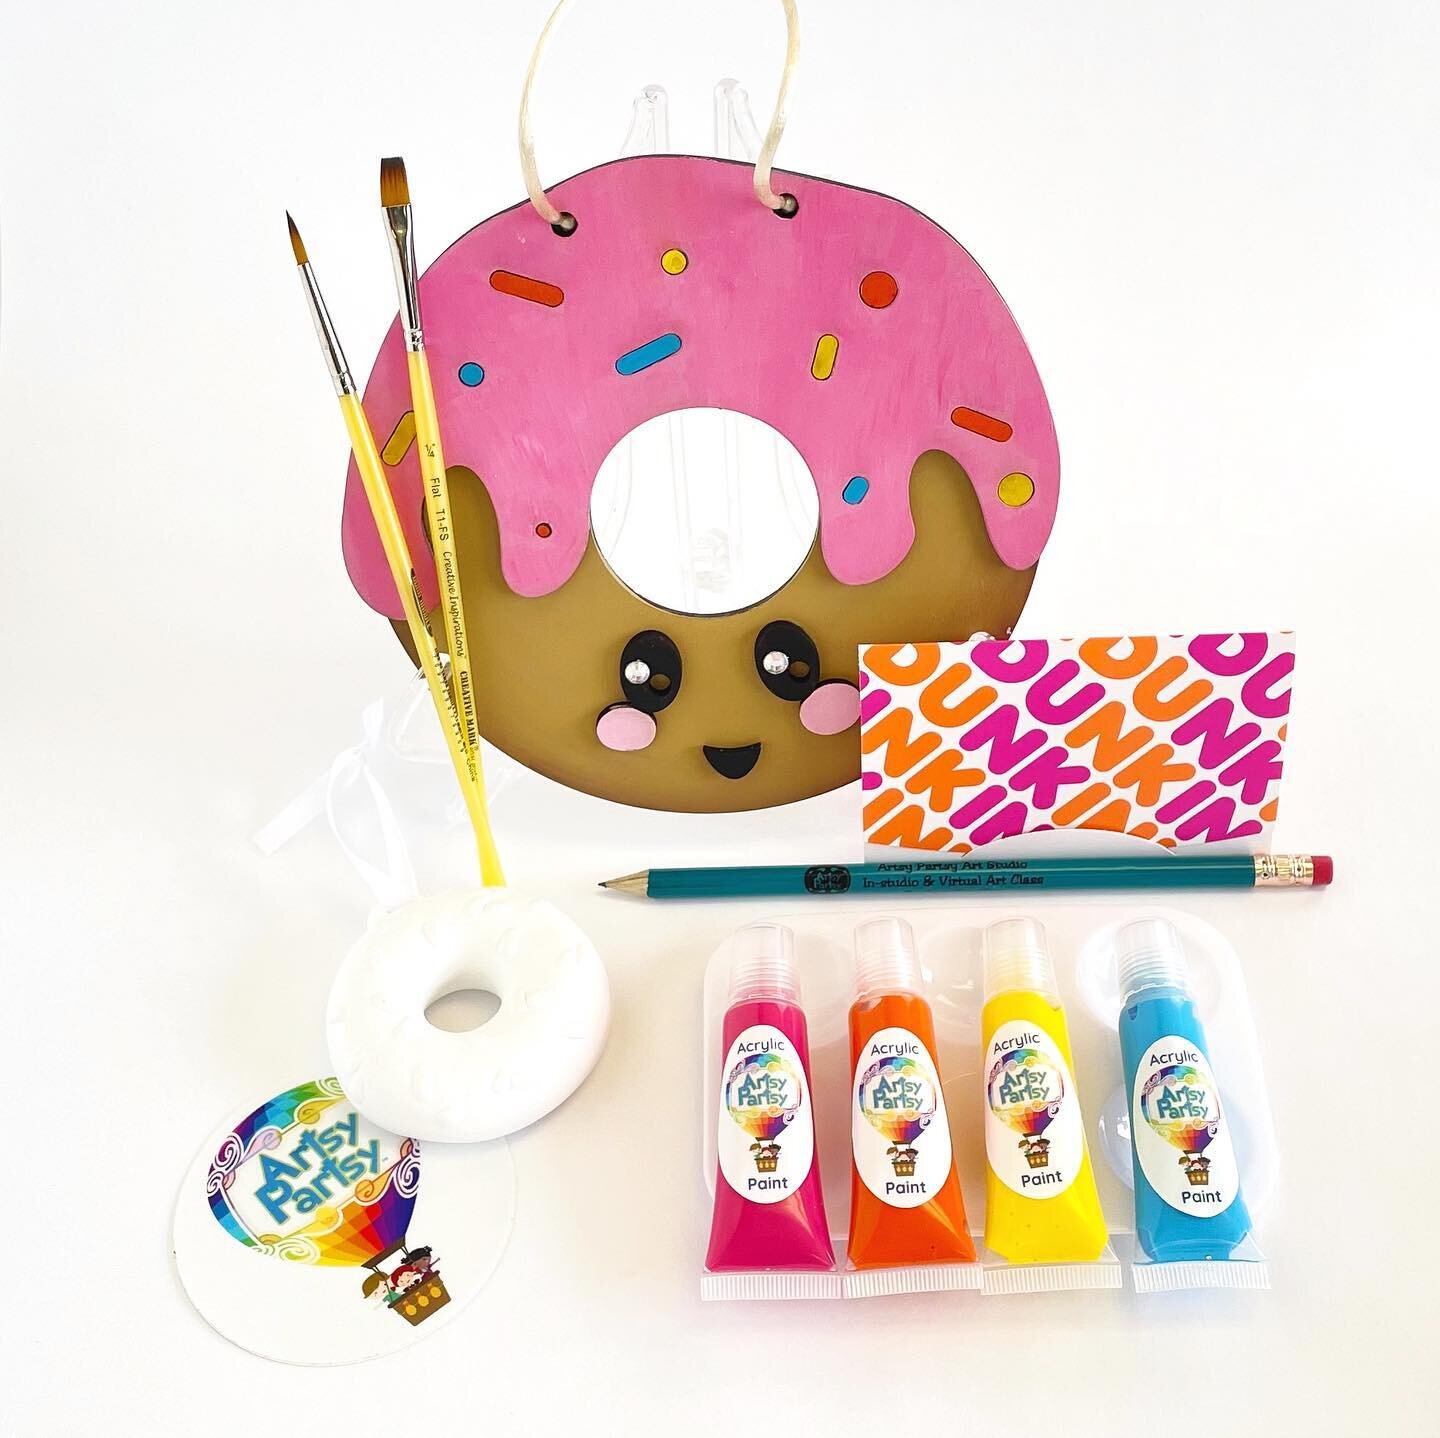 ✨ GIVEAWAY ✨

For Artsy Partsy&rsquo;s 9th birthday we are going to be doing a giveaway! 🎉 For the giveaway we are including a wooden donut art kit, a plaster ornament art kit, and a $10 Dunkin Donuts gift card! 🍩 the giveaway includes paint, mater